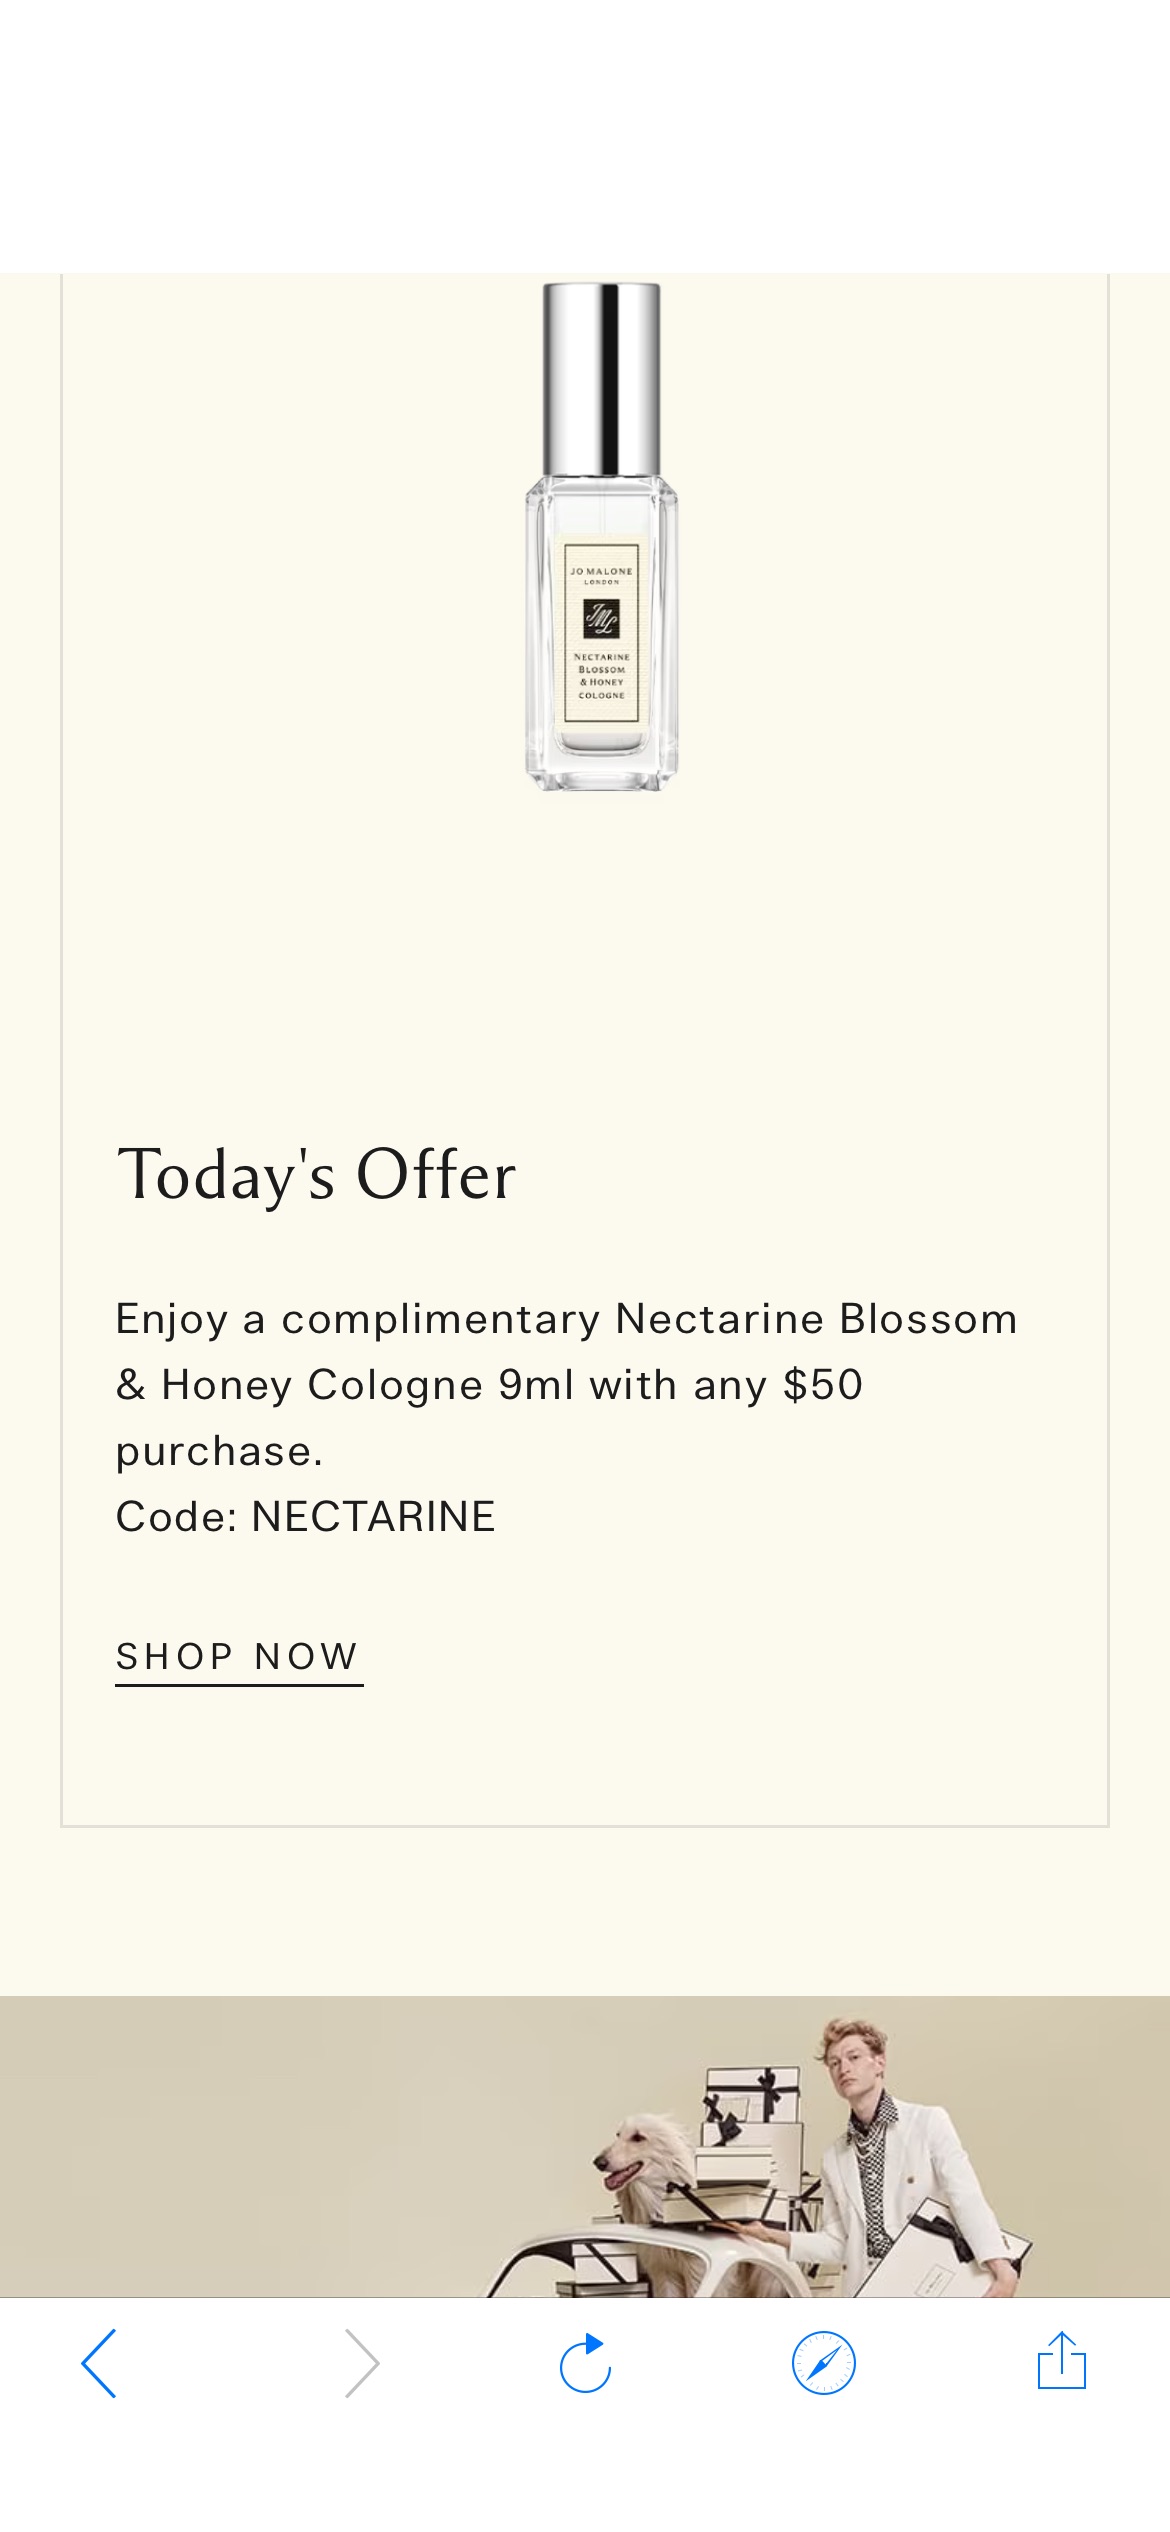 Today's Offer
Enjoy a complimentary Nectarine Blossom & Honey Cologne 9ml with any $50 purchase.
Code: NECTARINE